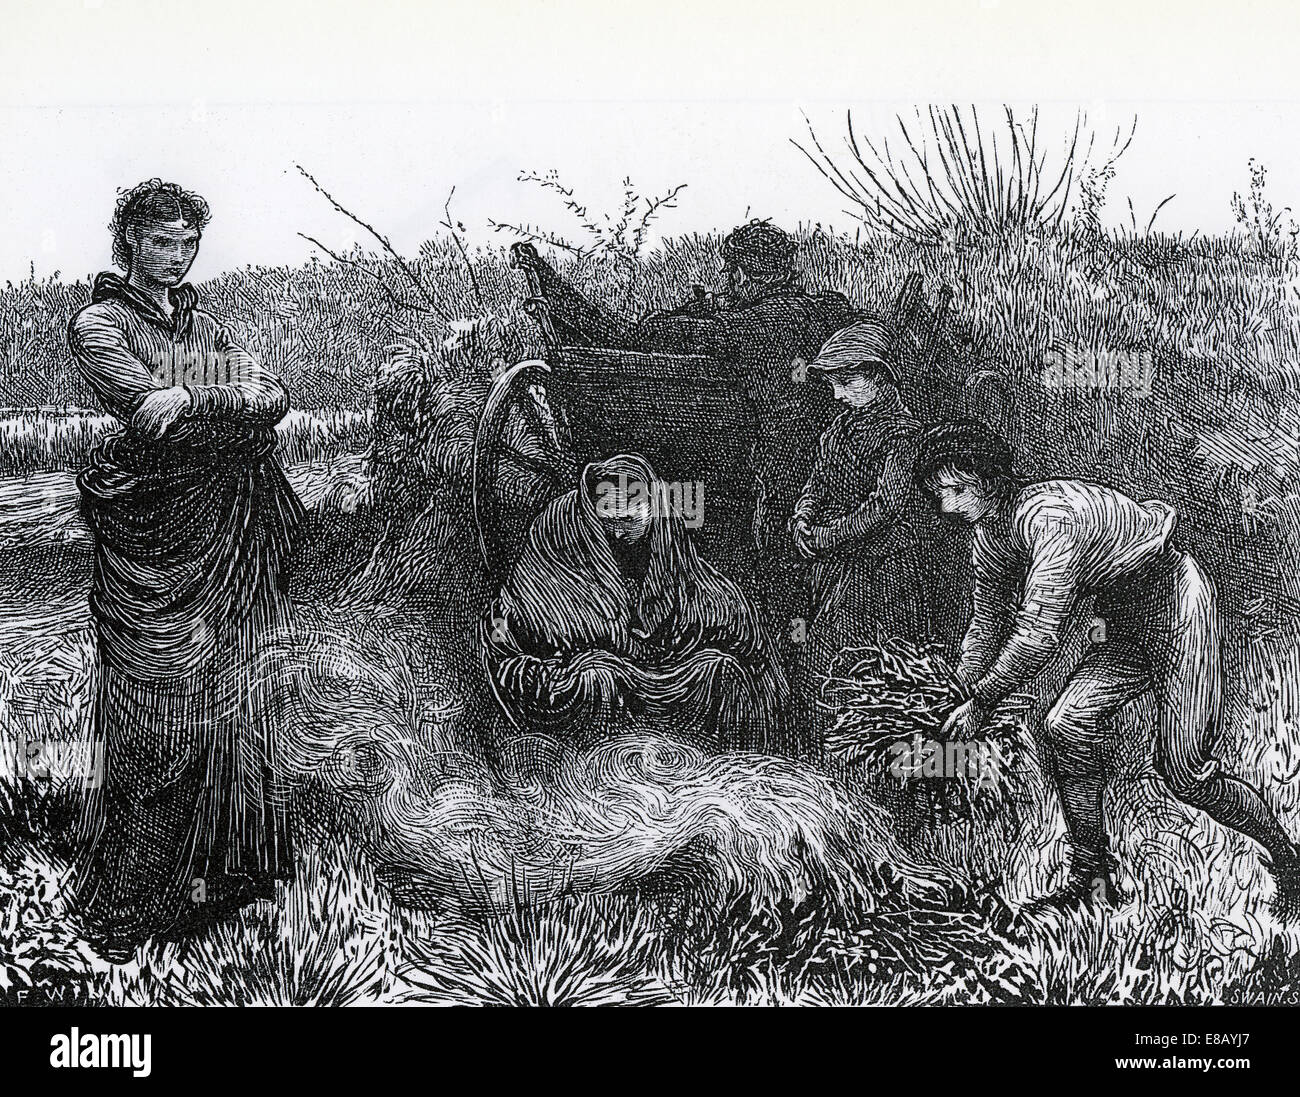 THE VAGRANTS Wood engraving by Joseph Swain in1865 shows a destitute family Stock Photo